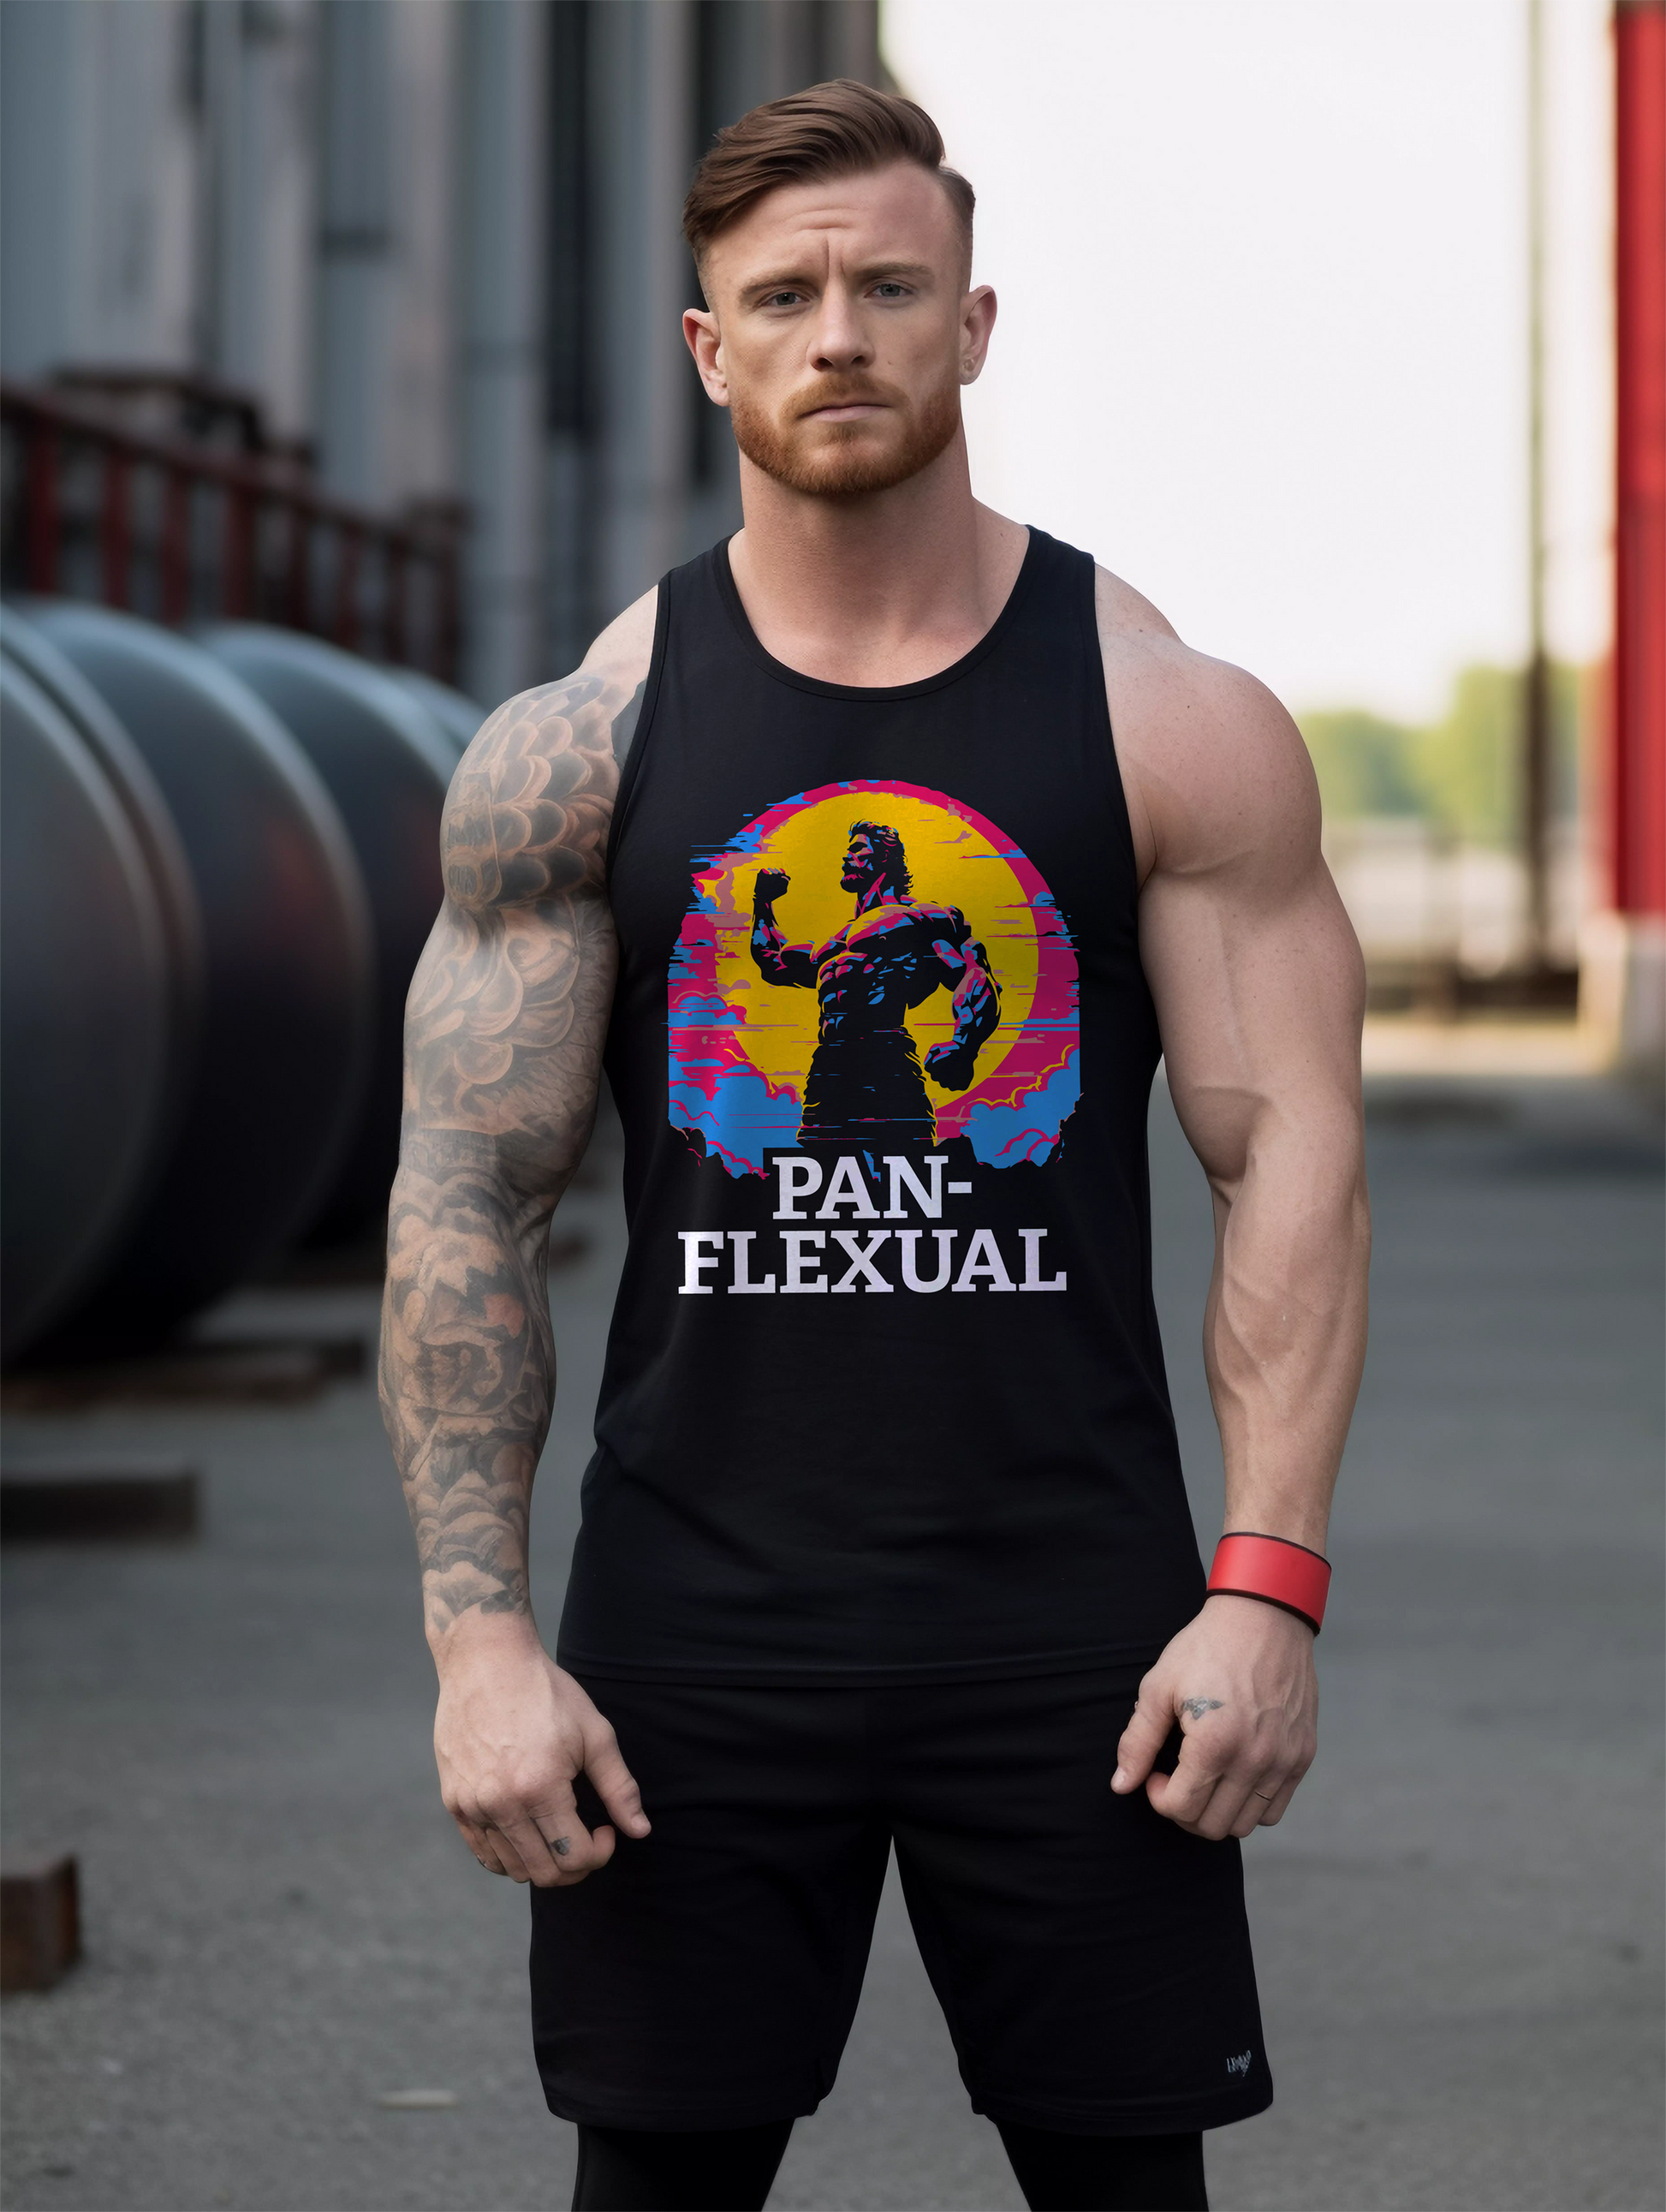 White muslced bodybuilder wearing a black tank top featuring a graphic with a muscled bodybuilder and the phrase "Pan-Flexual" on it.